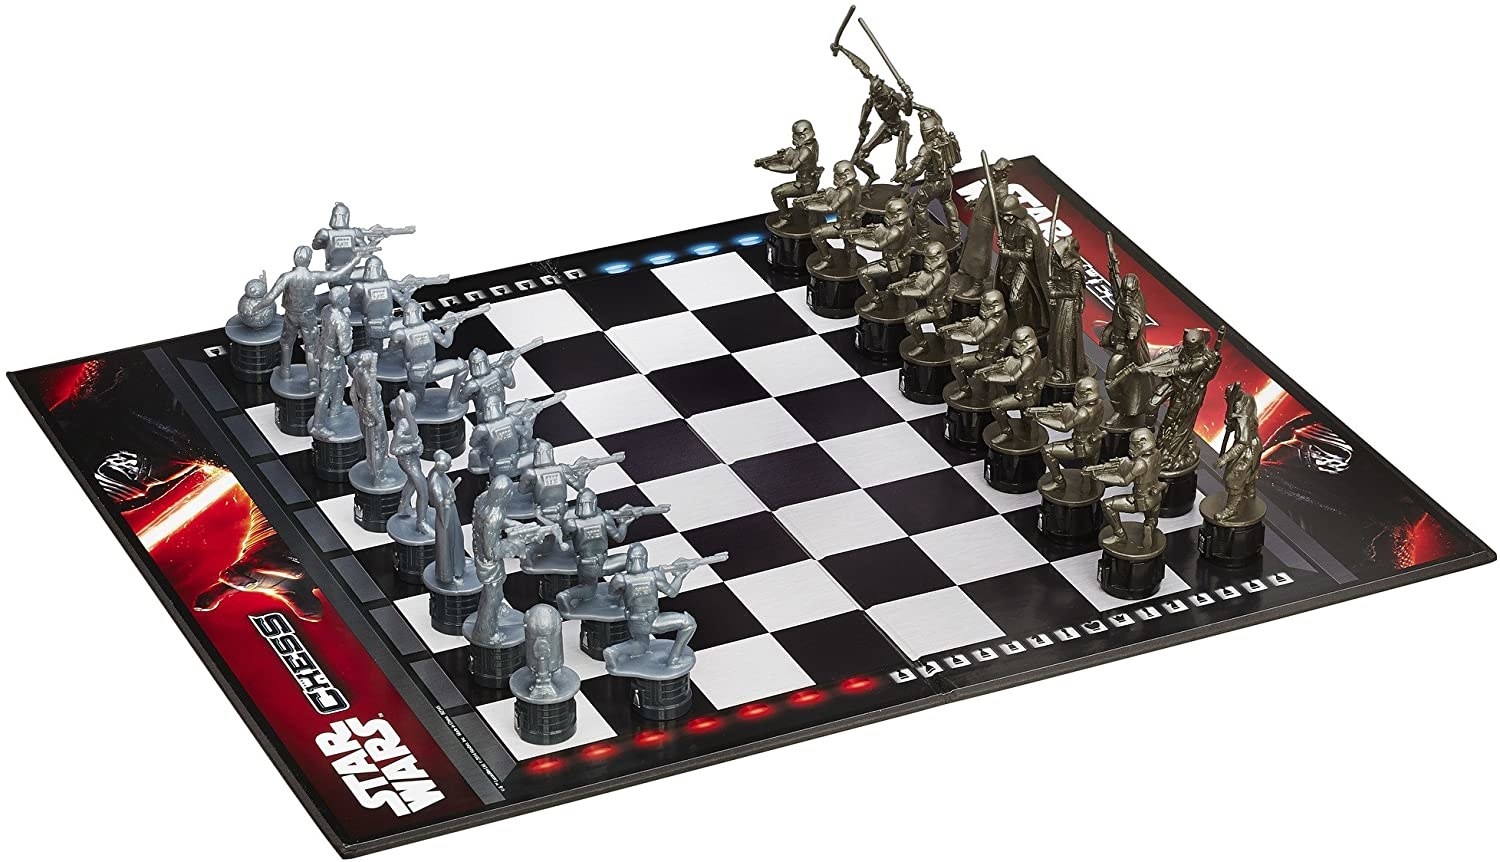 Red, black, and white Star Wars-themed chessboard with character pawns set up